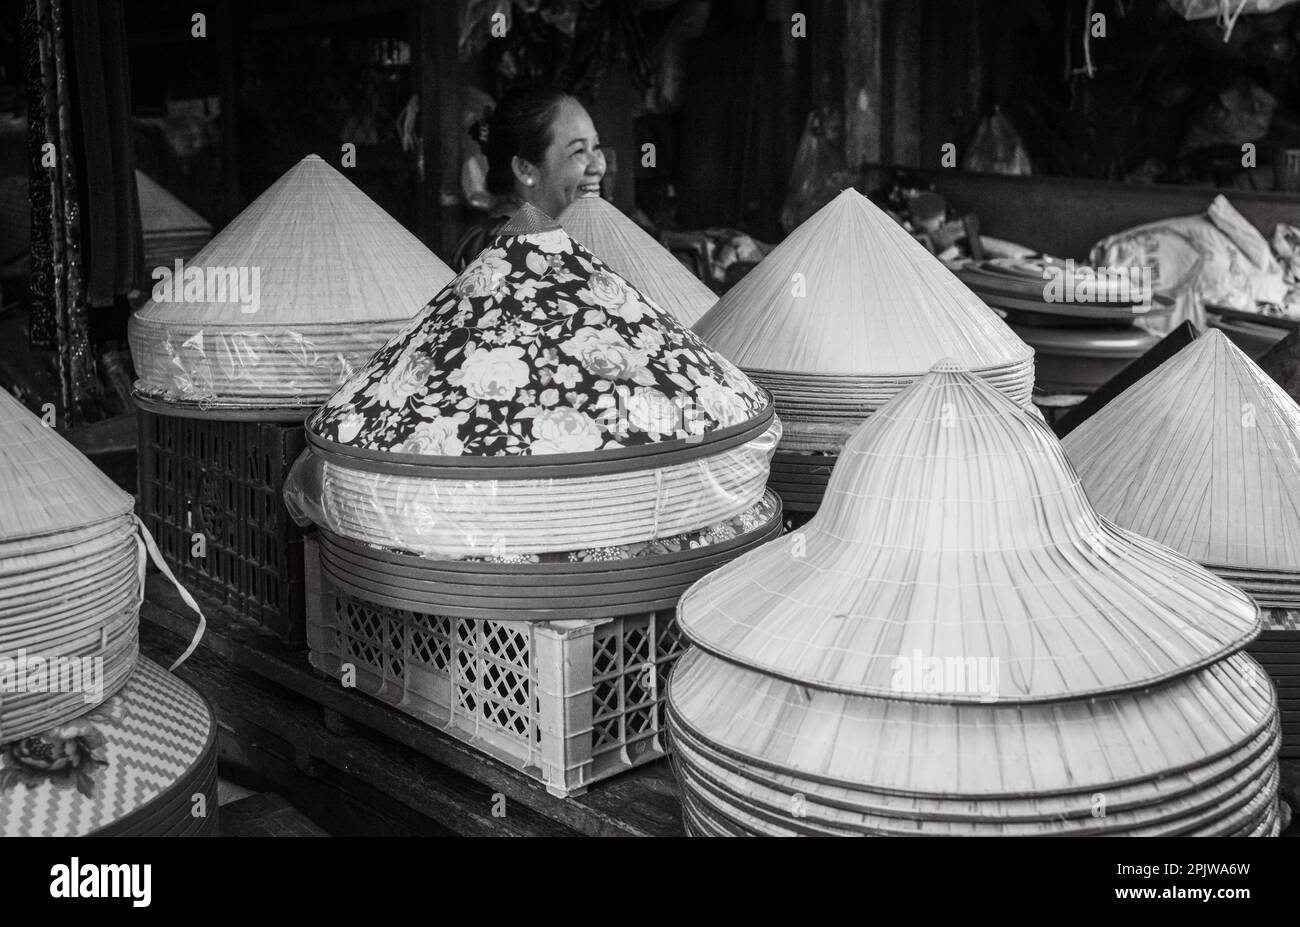 A woman laughs as she sits at her stall selling traditional concial hats in Pleiku Central Market, Vietnam. Stock Photo